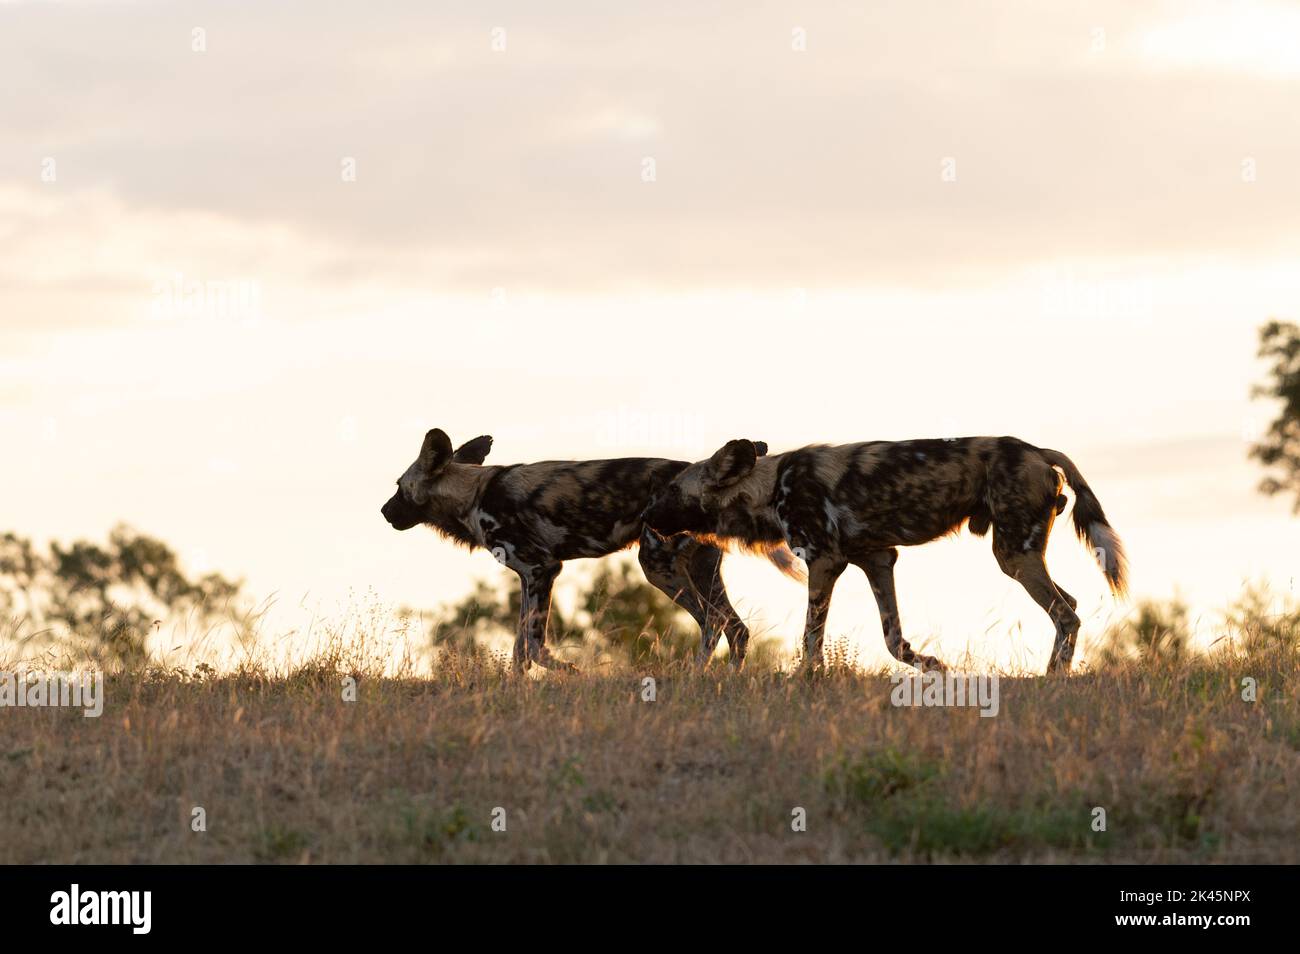 Two wild dogs, Lycaon pictus, run through the grass, backlit Stock Photo